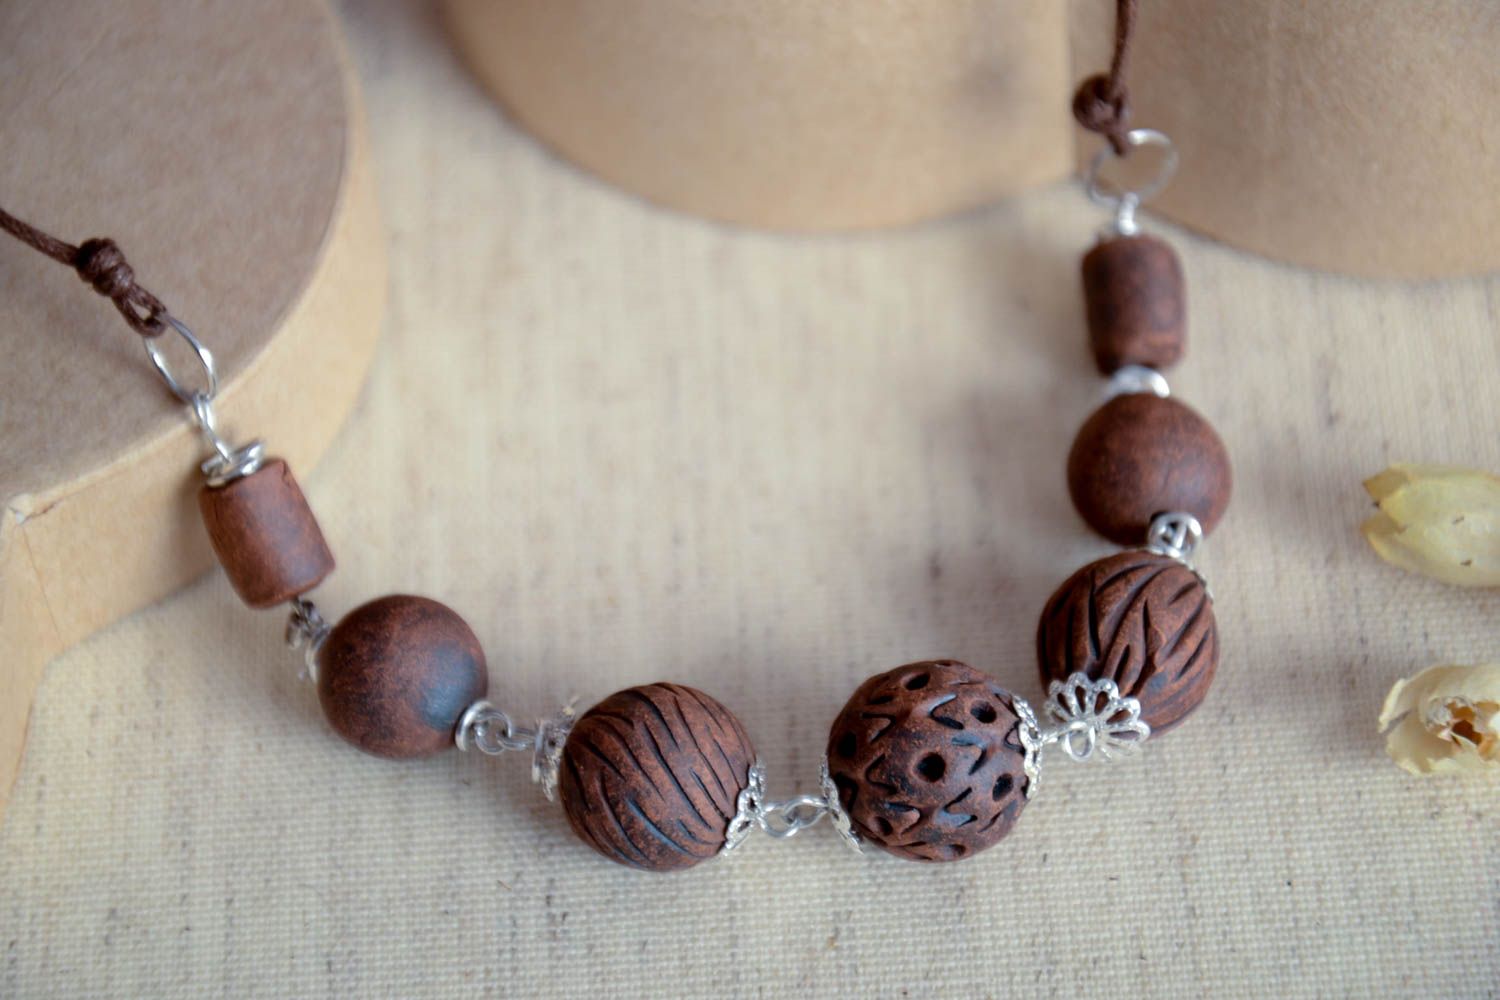 Handmade clay necklace clay jewelry ceramic accessories beaded necklace photo 1